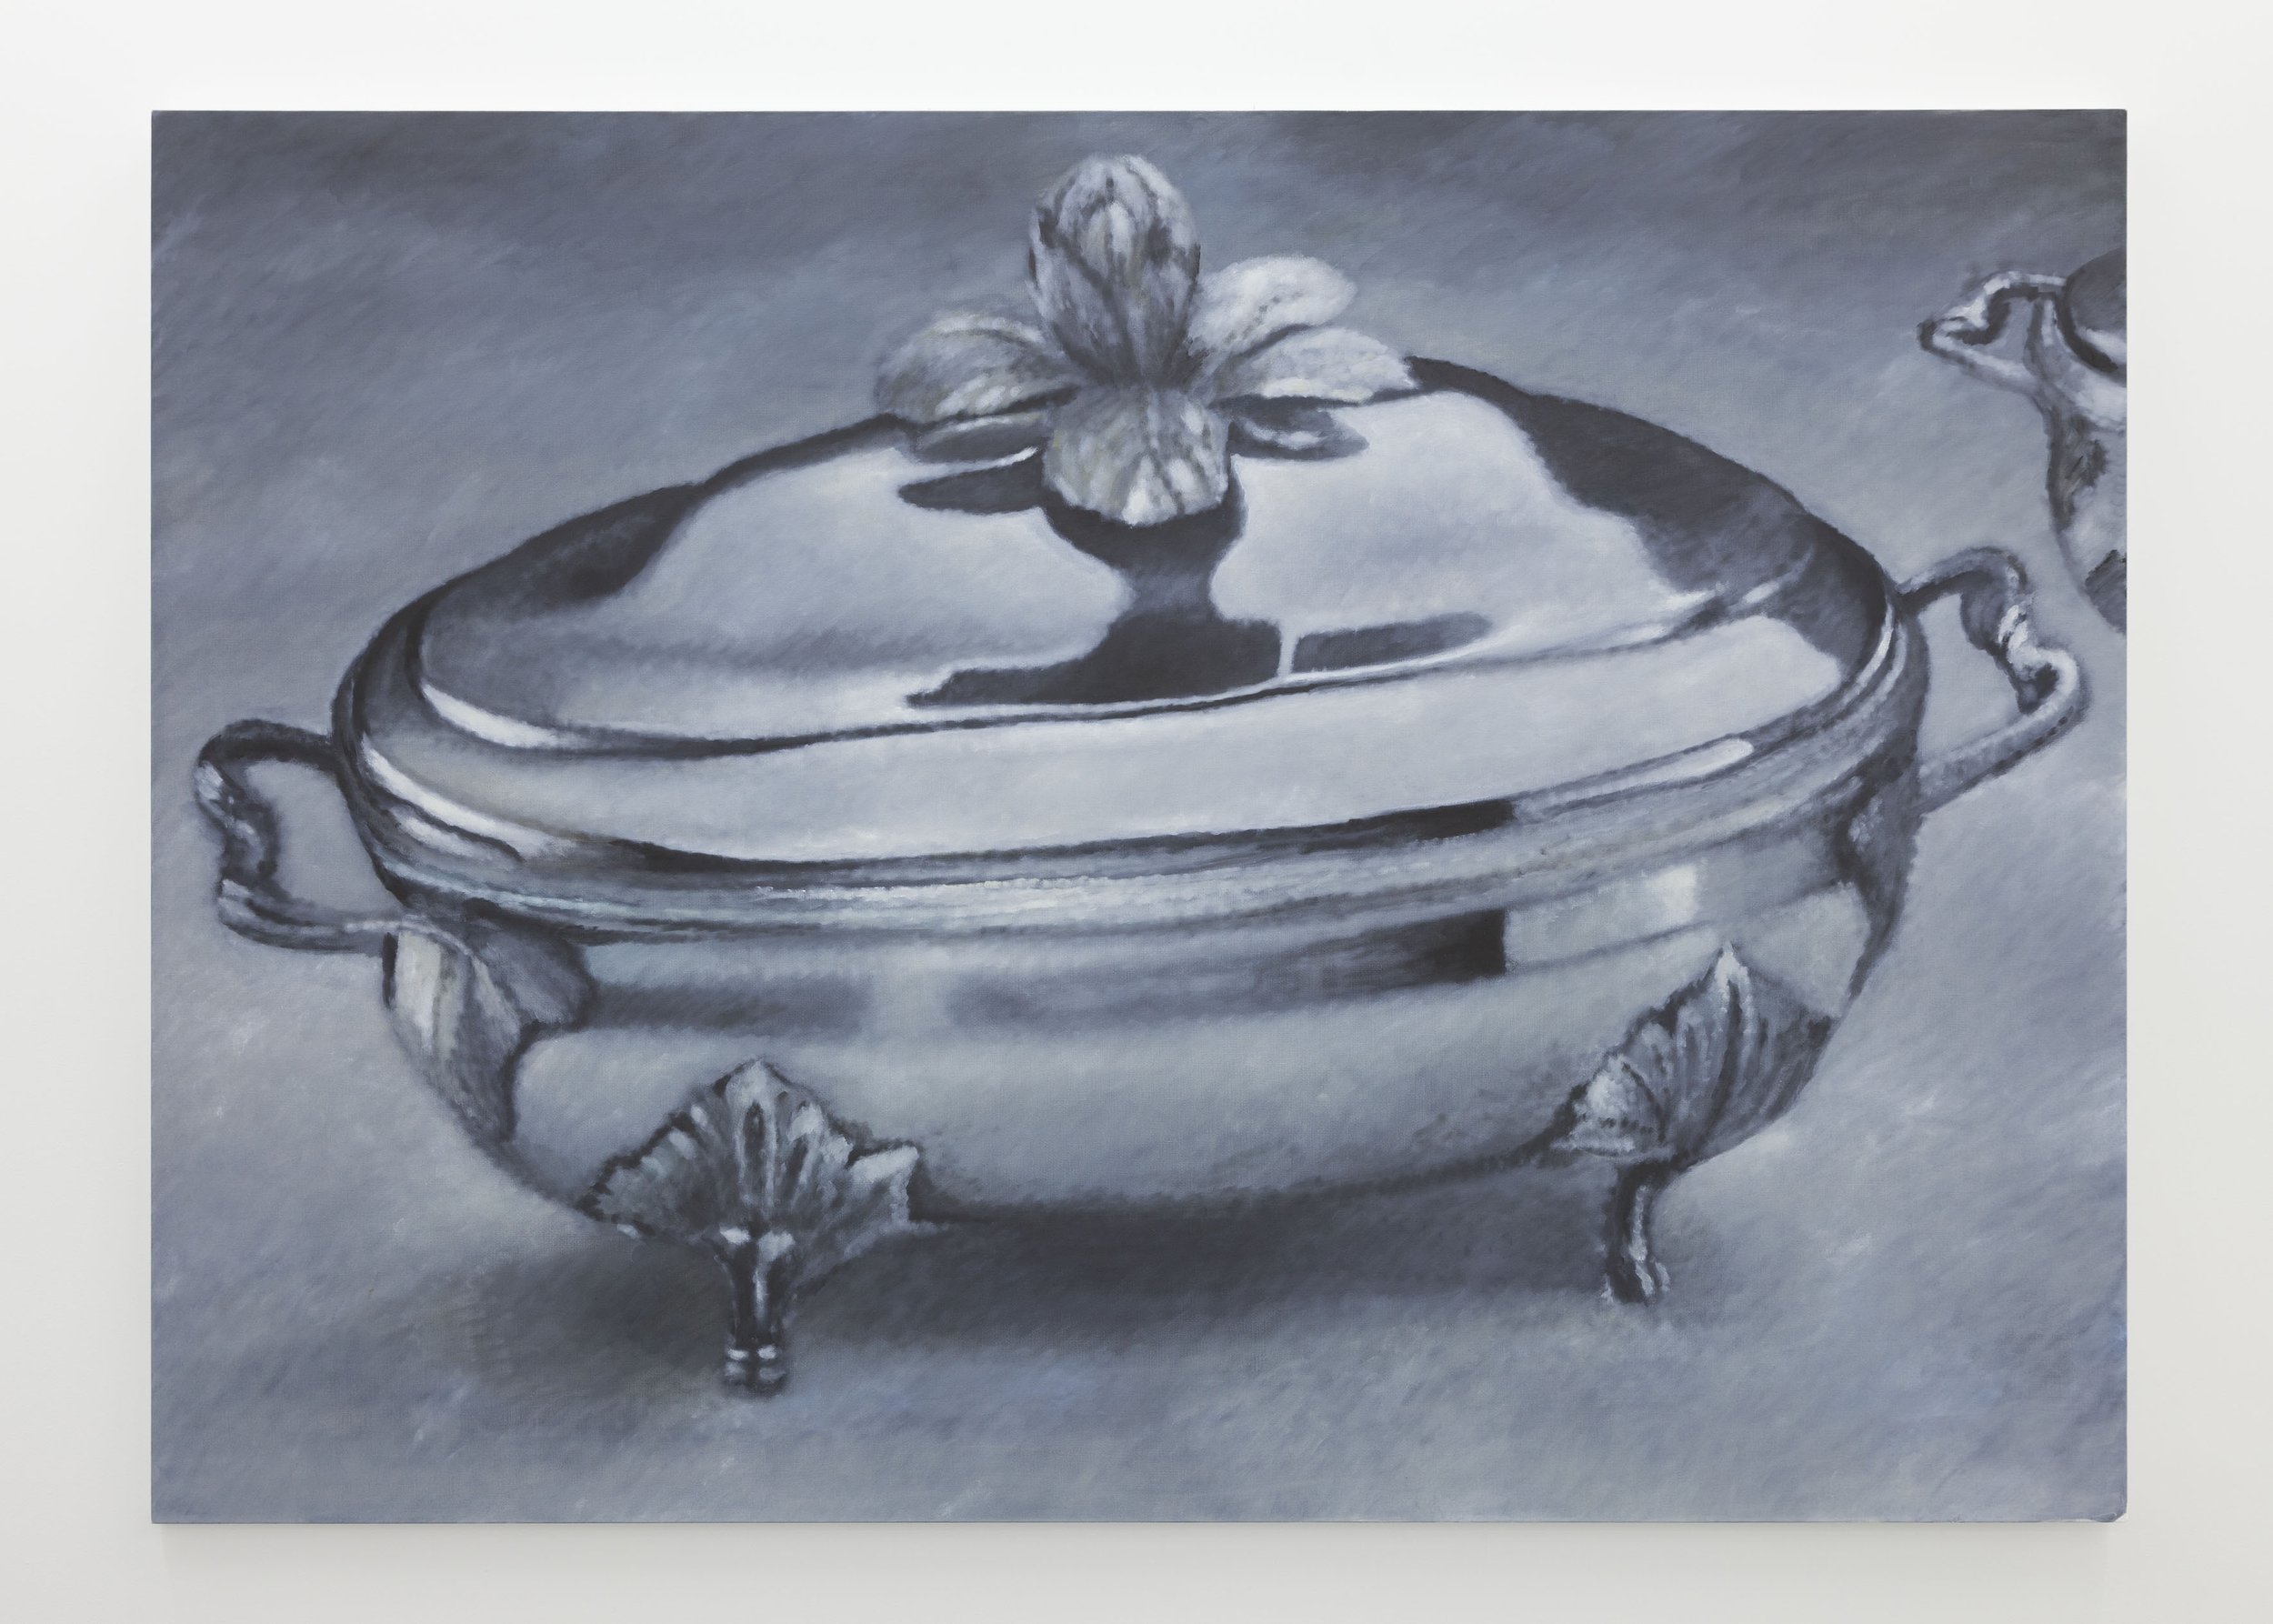 Issy Wood, Study for a tureen 4, 2019. Oil on linen. Photo Courtesy:Lafayette Anticipations.